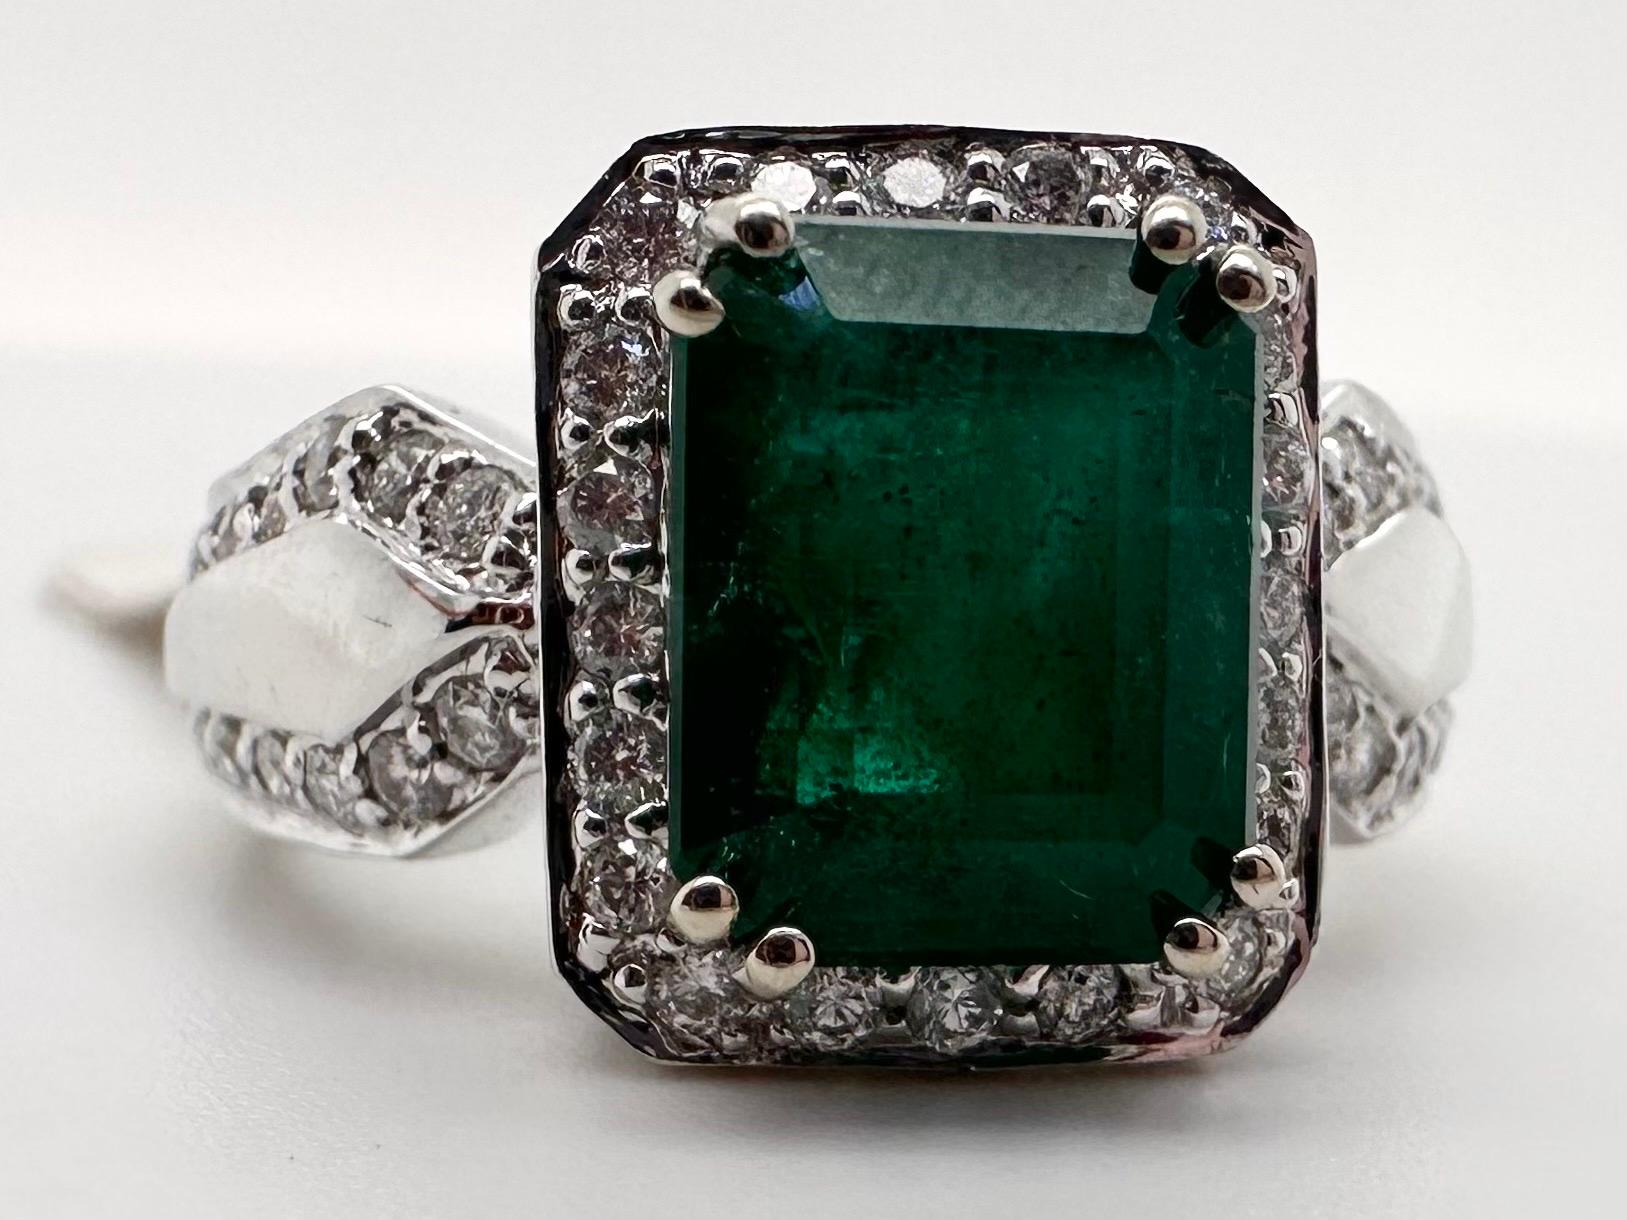 Rare stunning Zambian emerald diamond ring in 14KT white gold, certificate from AIG. Ring is size 7 and can be re-sized. The diamond weight is 0.77ct, the emerald is 2.94ct with moderately included clarity and green color. The diamonds are VS-SI